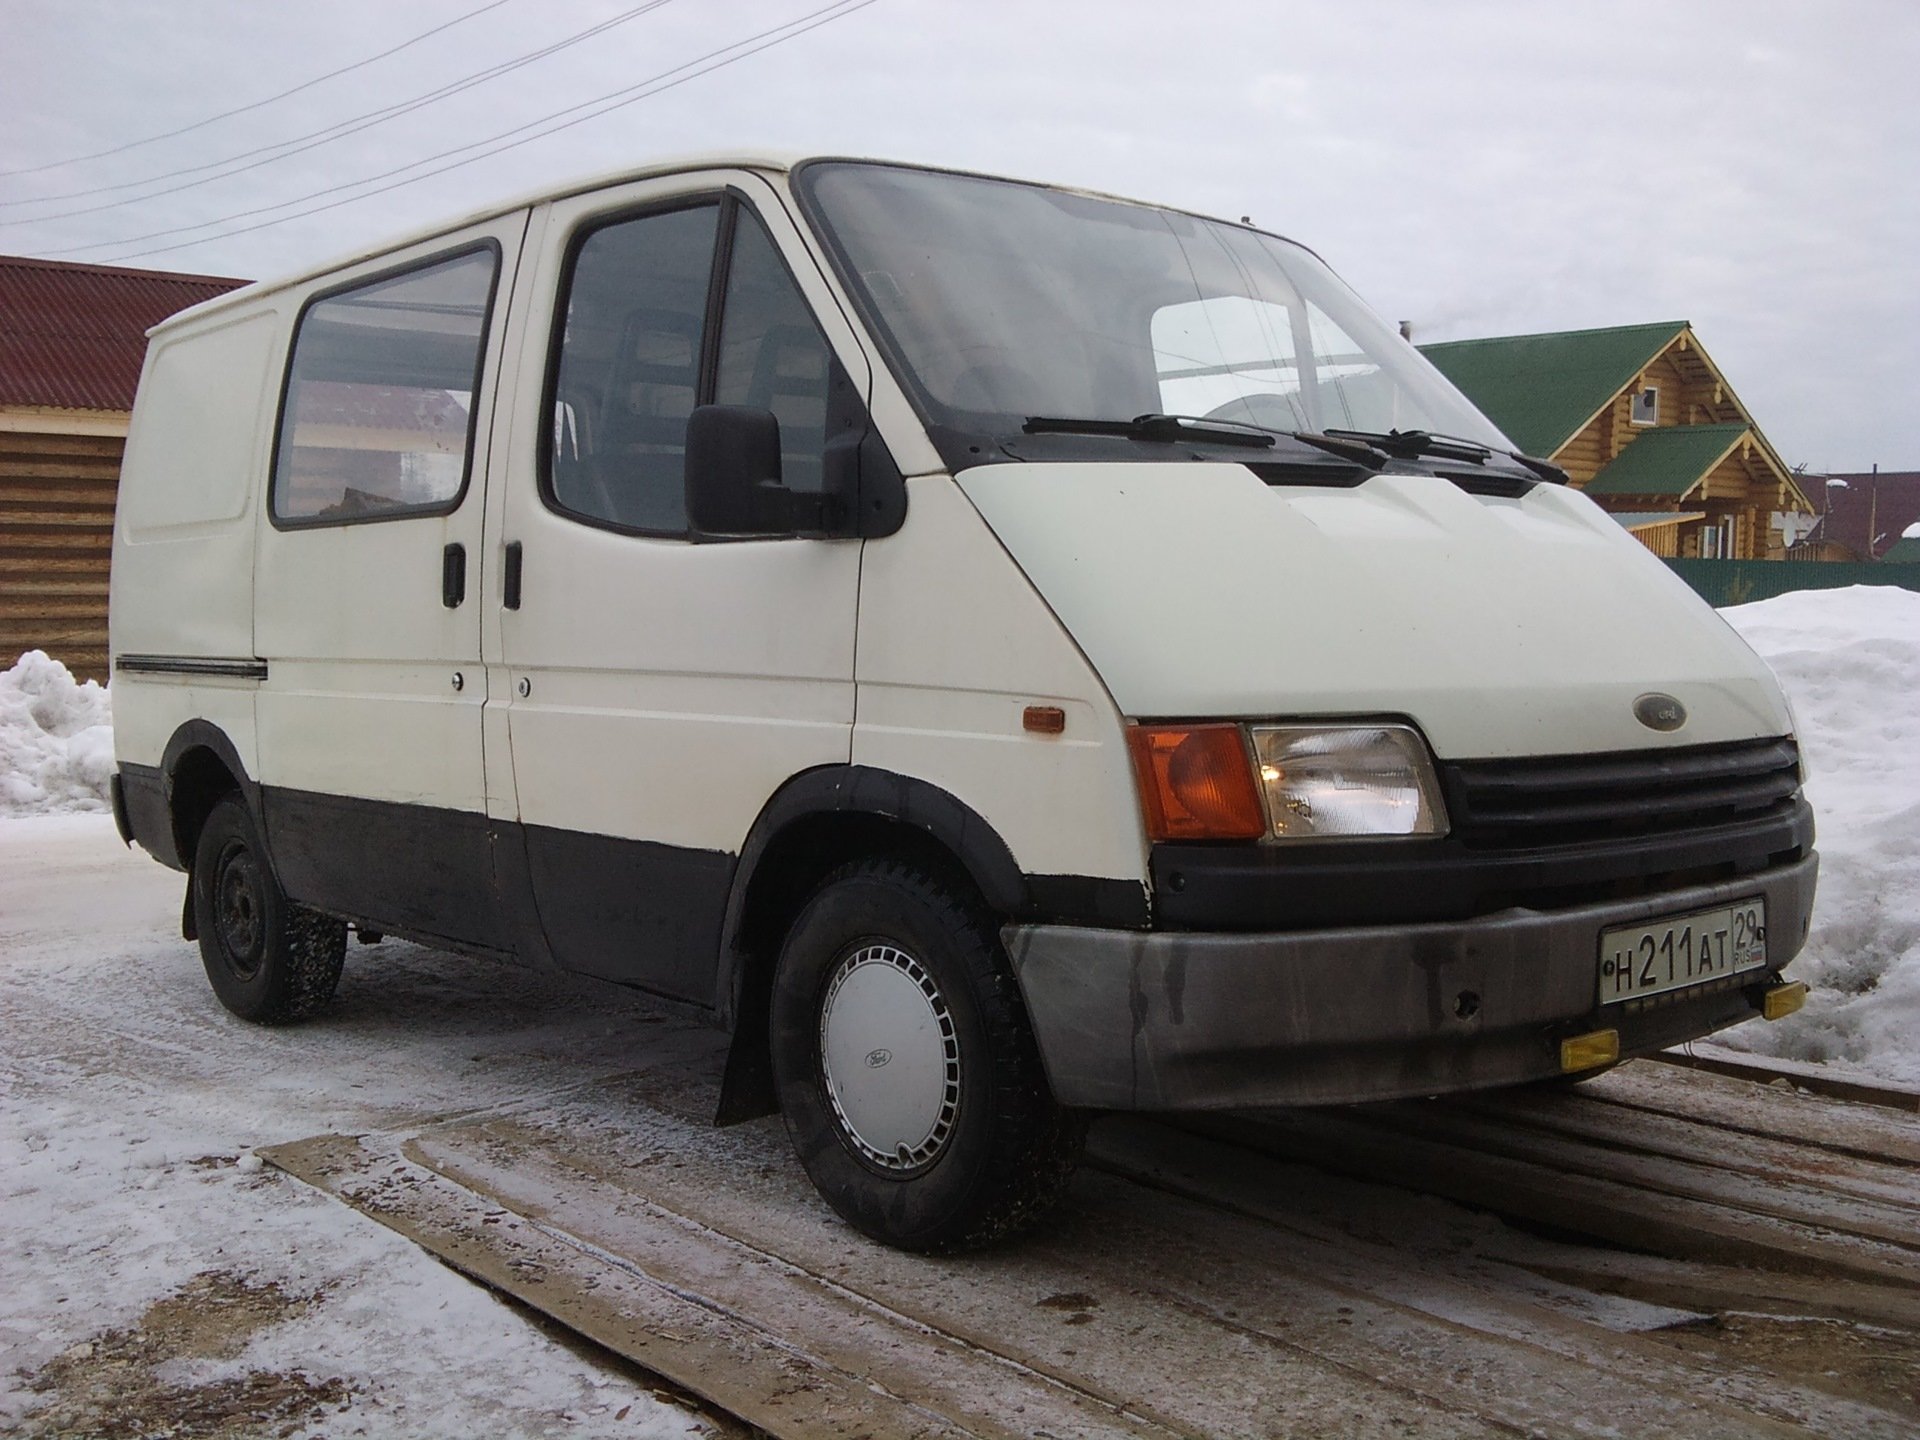 Форд транзит 1990. Ford Transit 1990. Ford Transit 1990 2.5. Форд Транзит 90 годов. Ford Transit 4g.